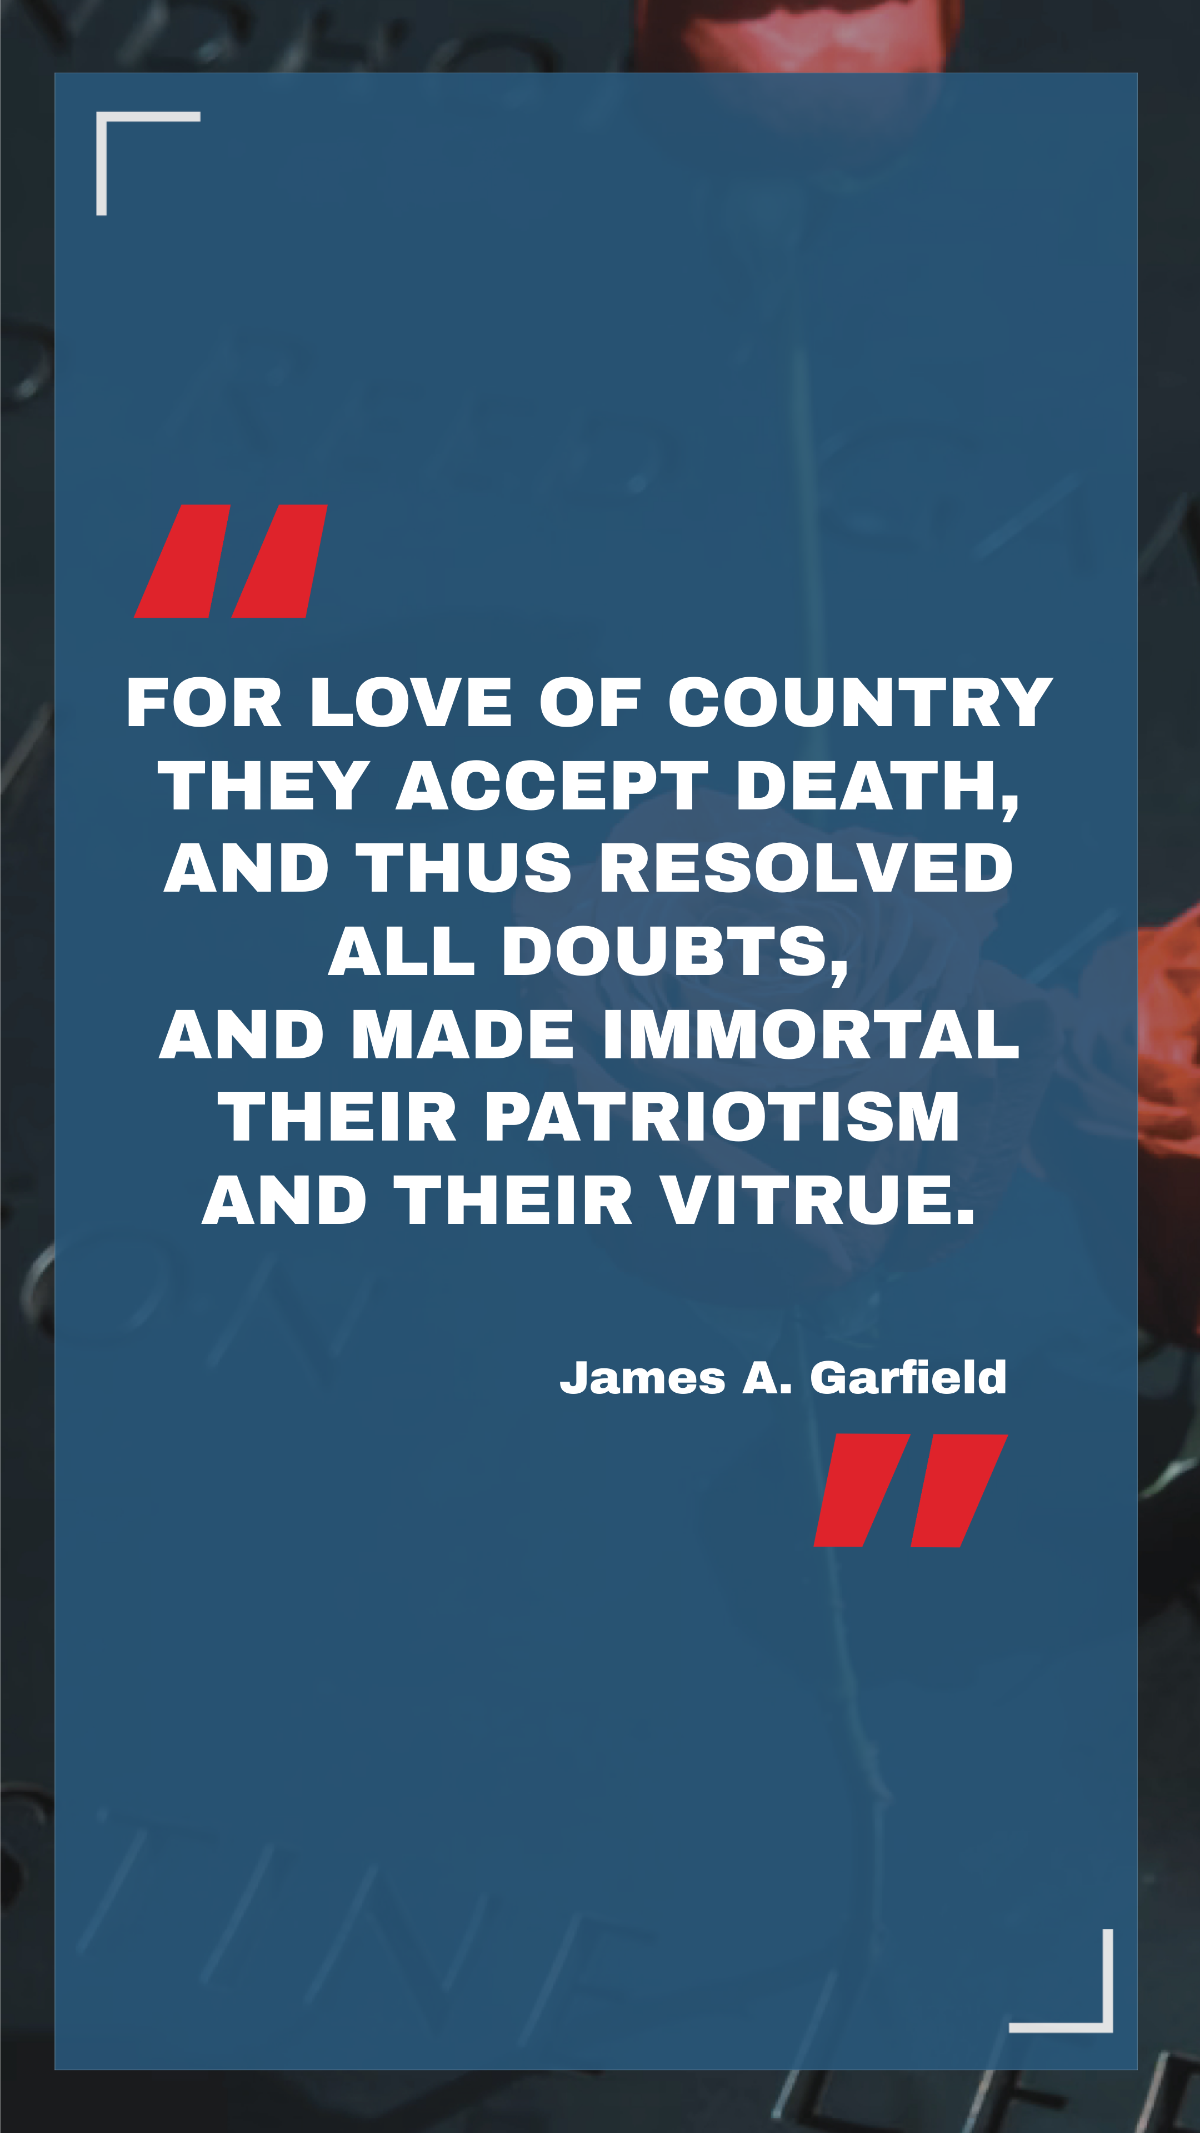 James A. Garfield - For love of country they accepted death, and thus resolved all doubts, and made immortal their patriotism and their virtue. Template